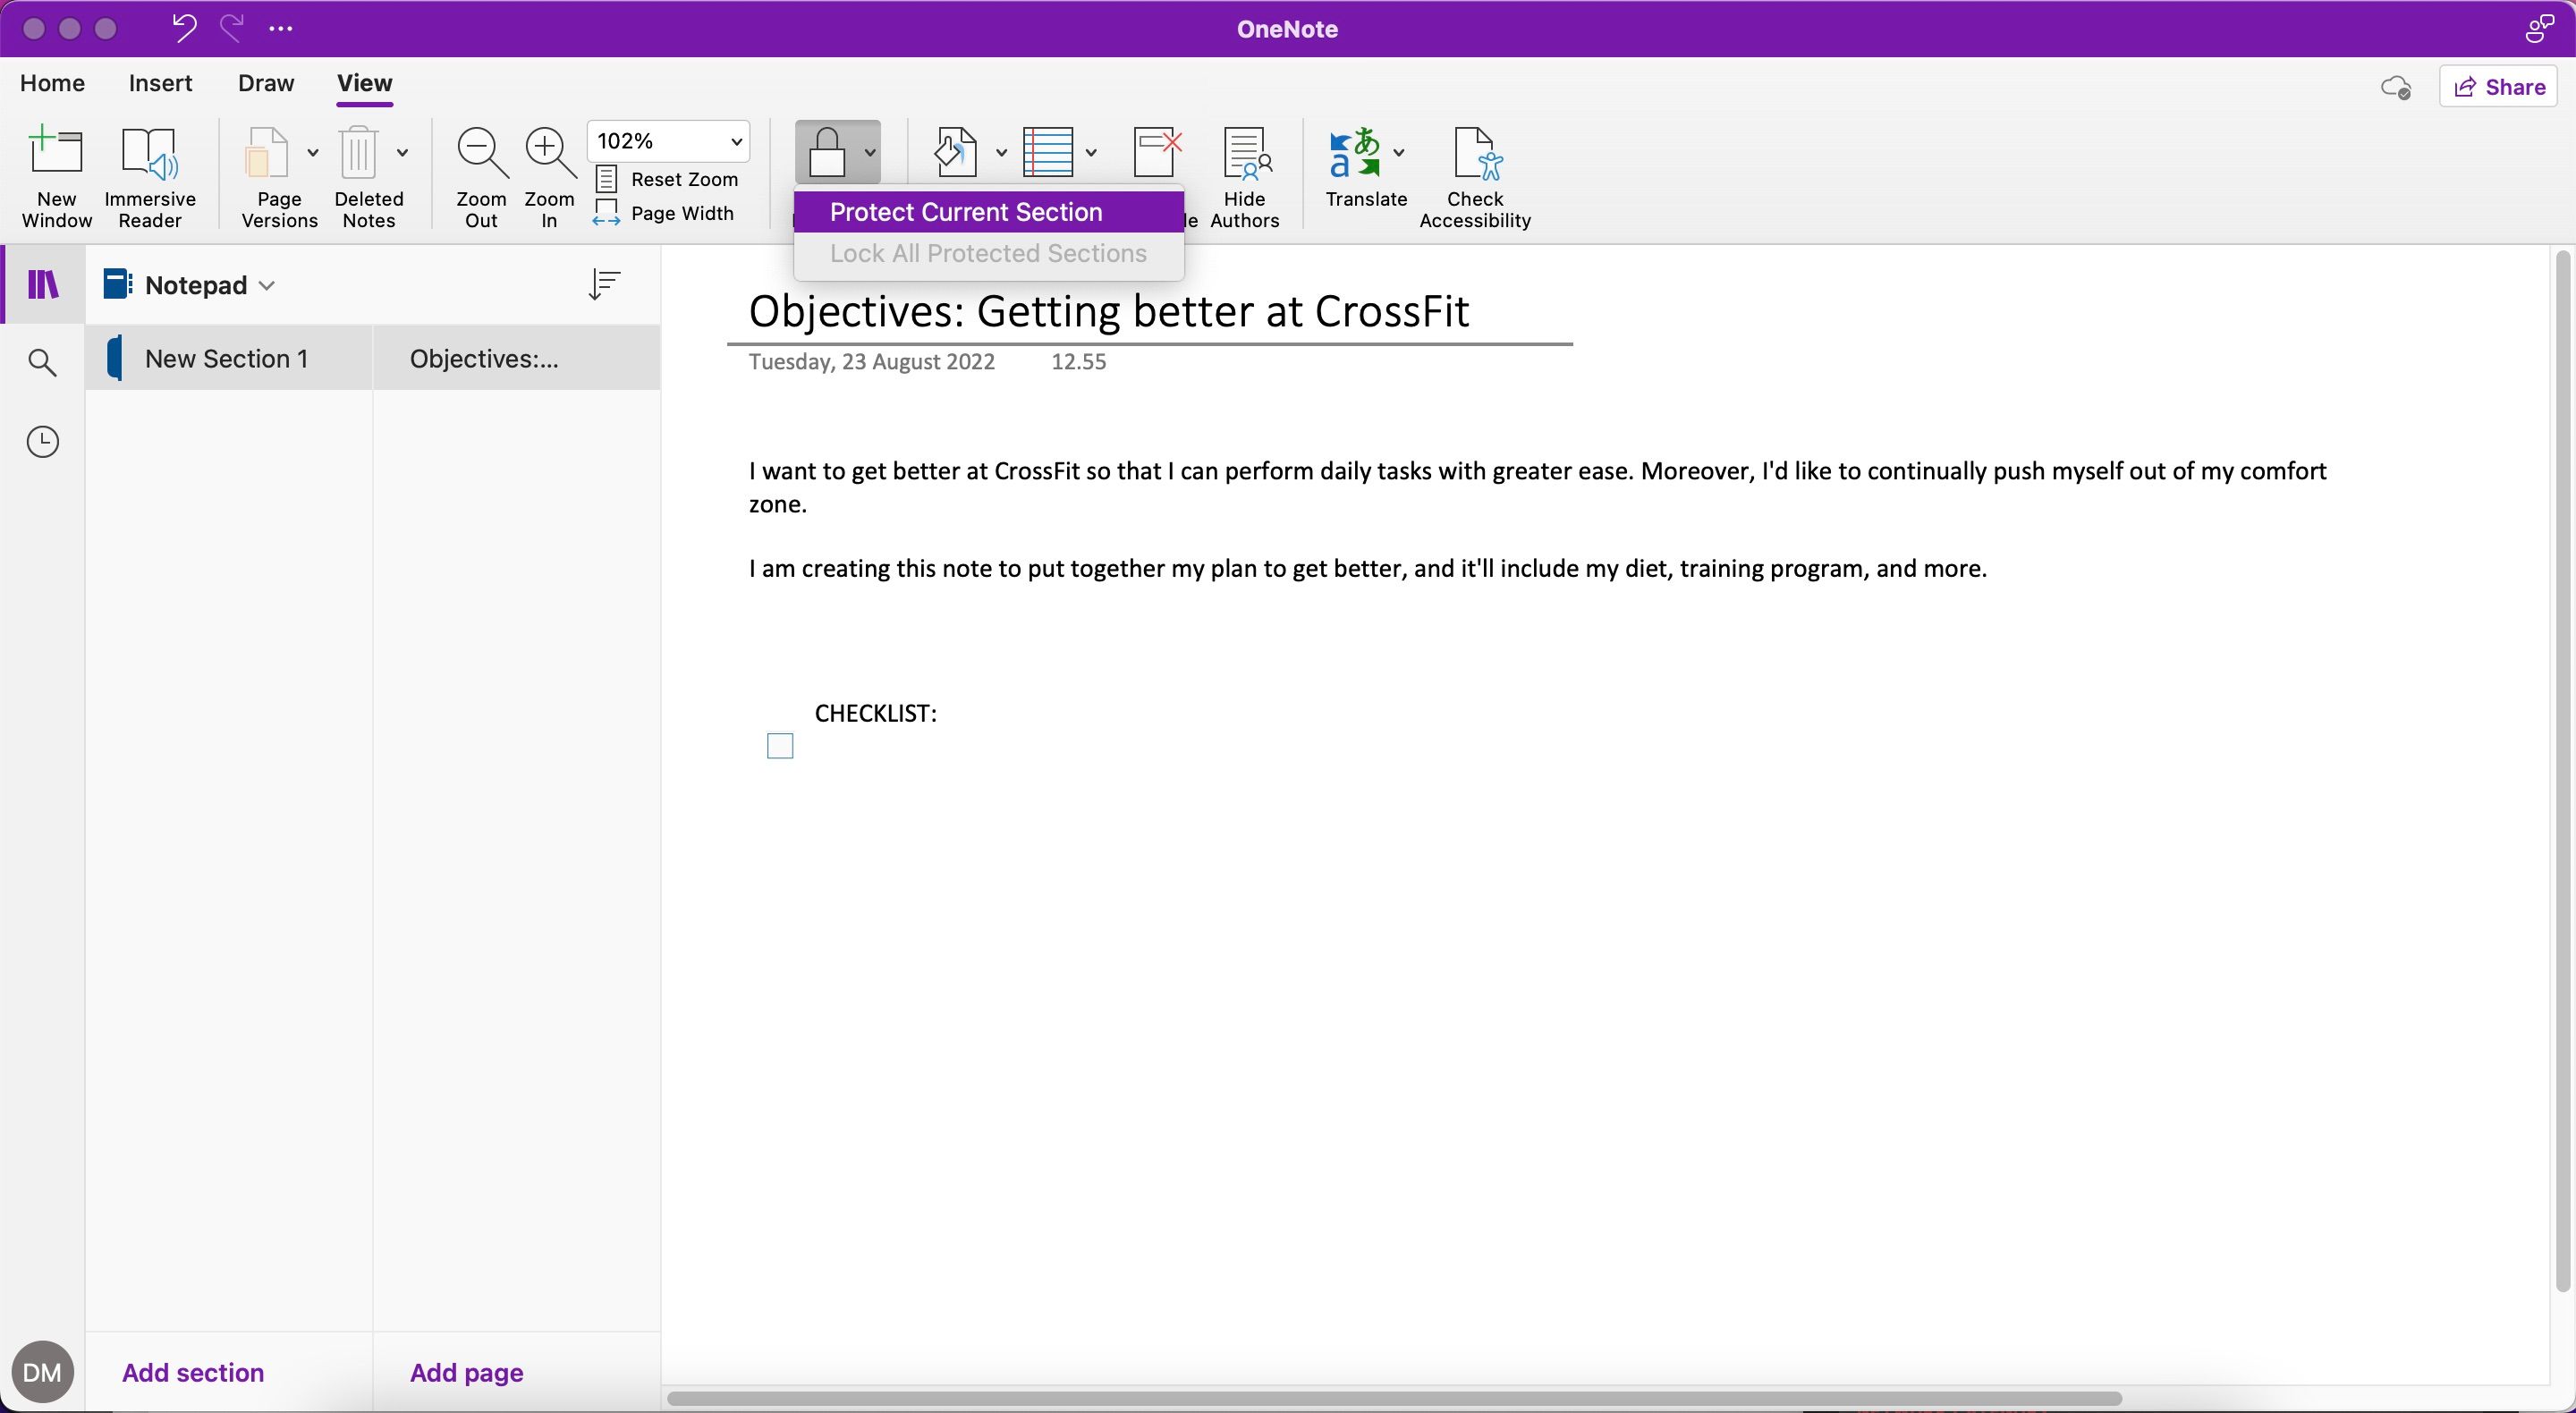 Screenshot showing password protection features on OneNote